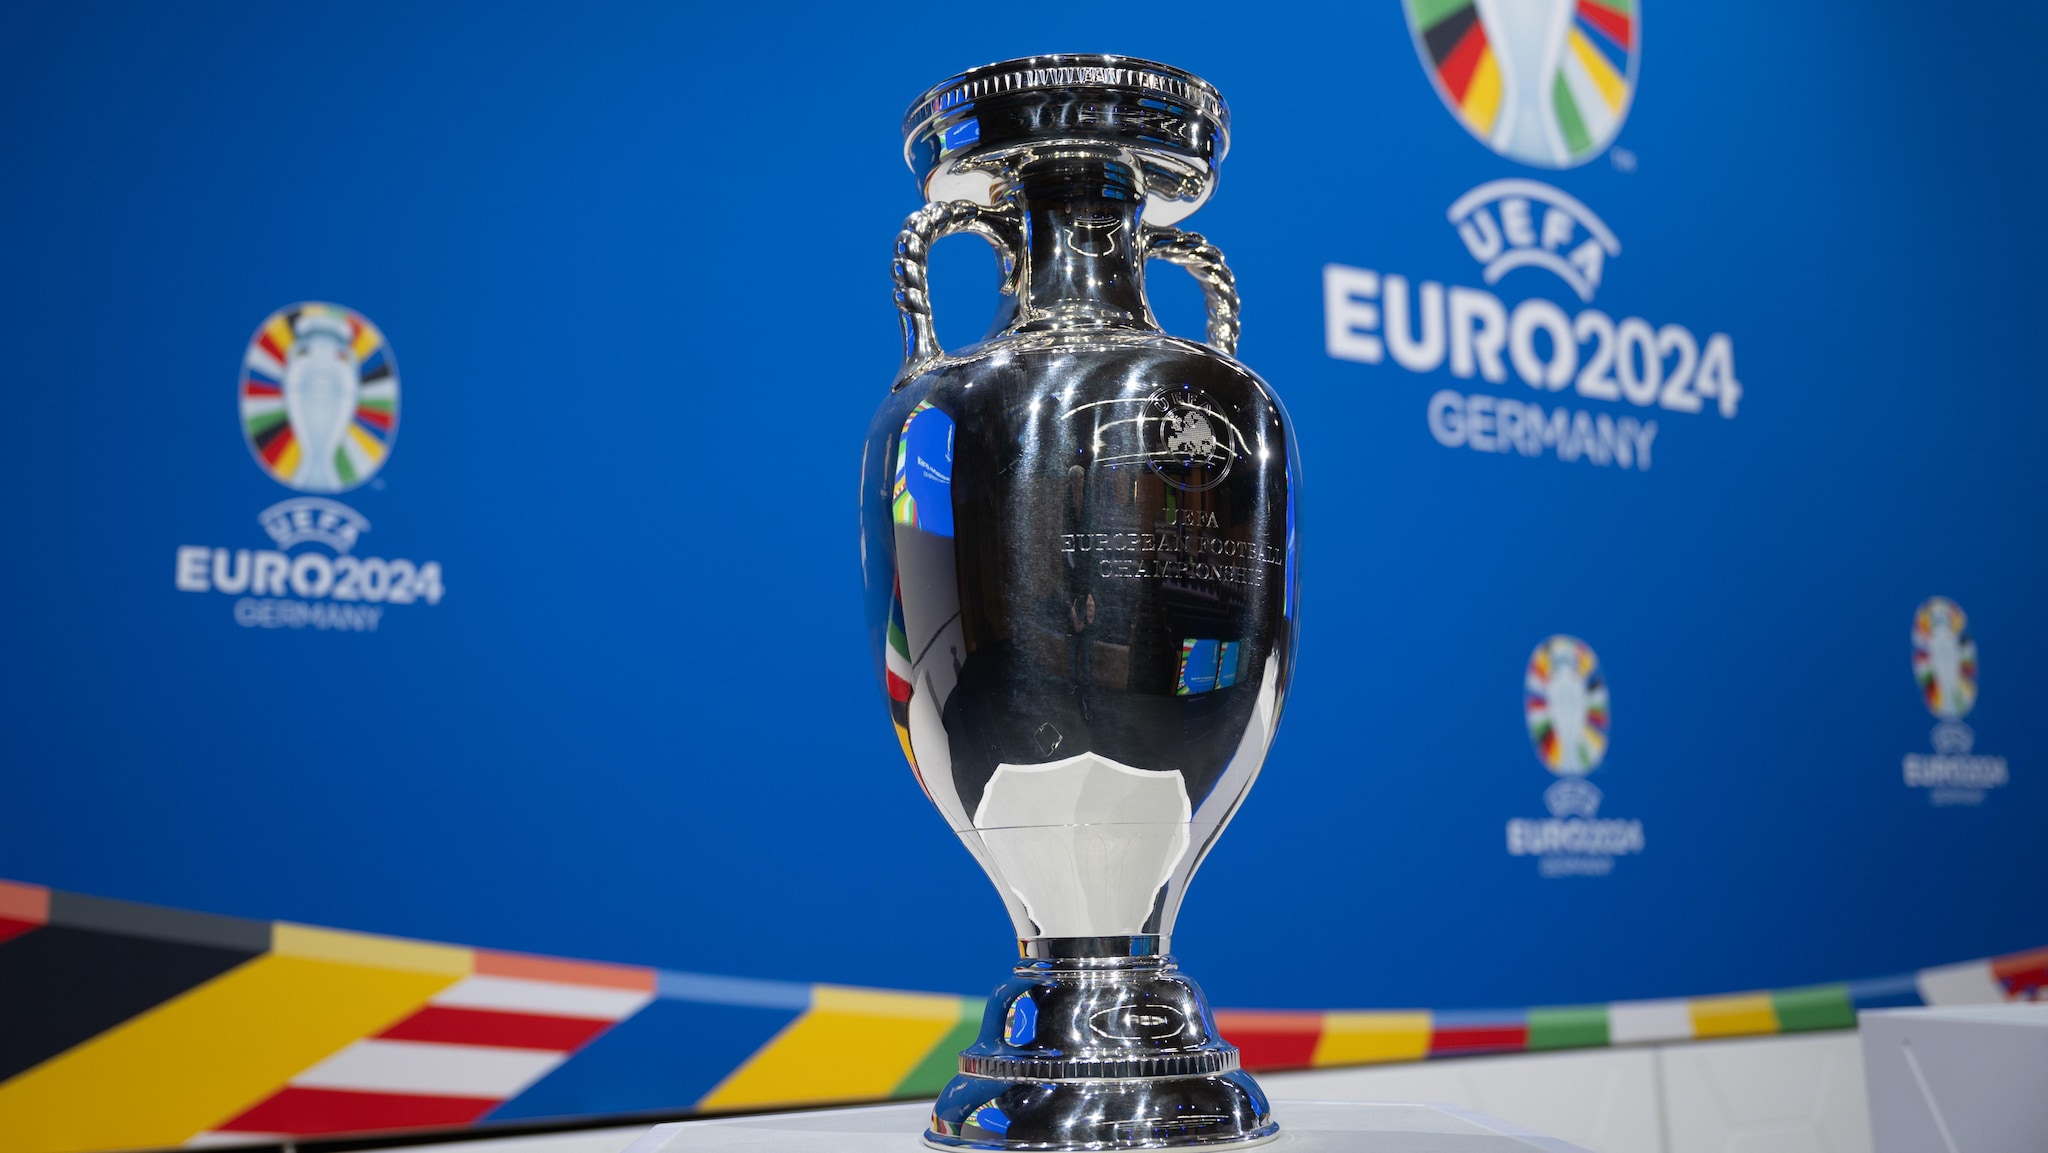 UEFA EURO 2024 fixtures: Full schedule, dates and TV channels